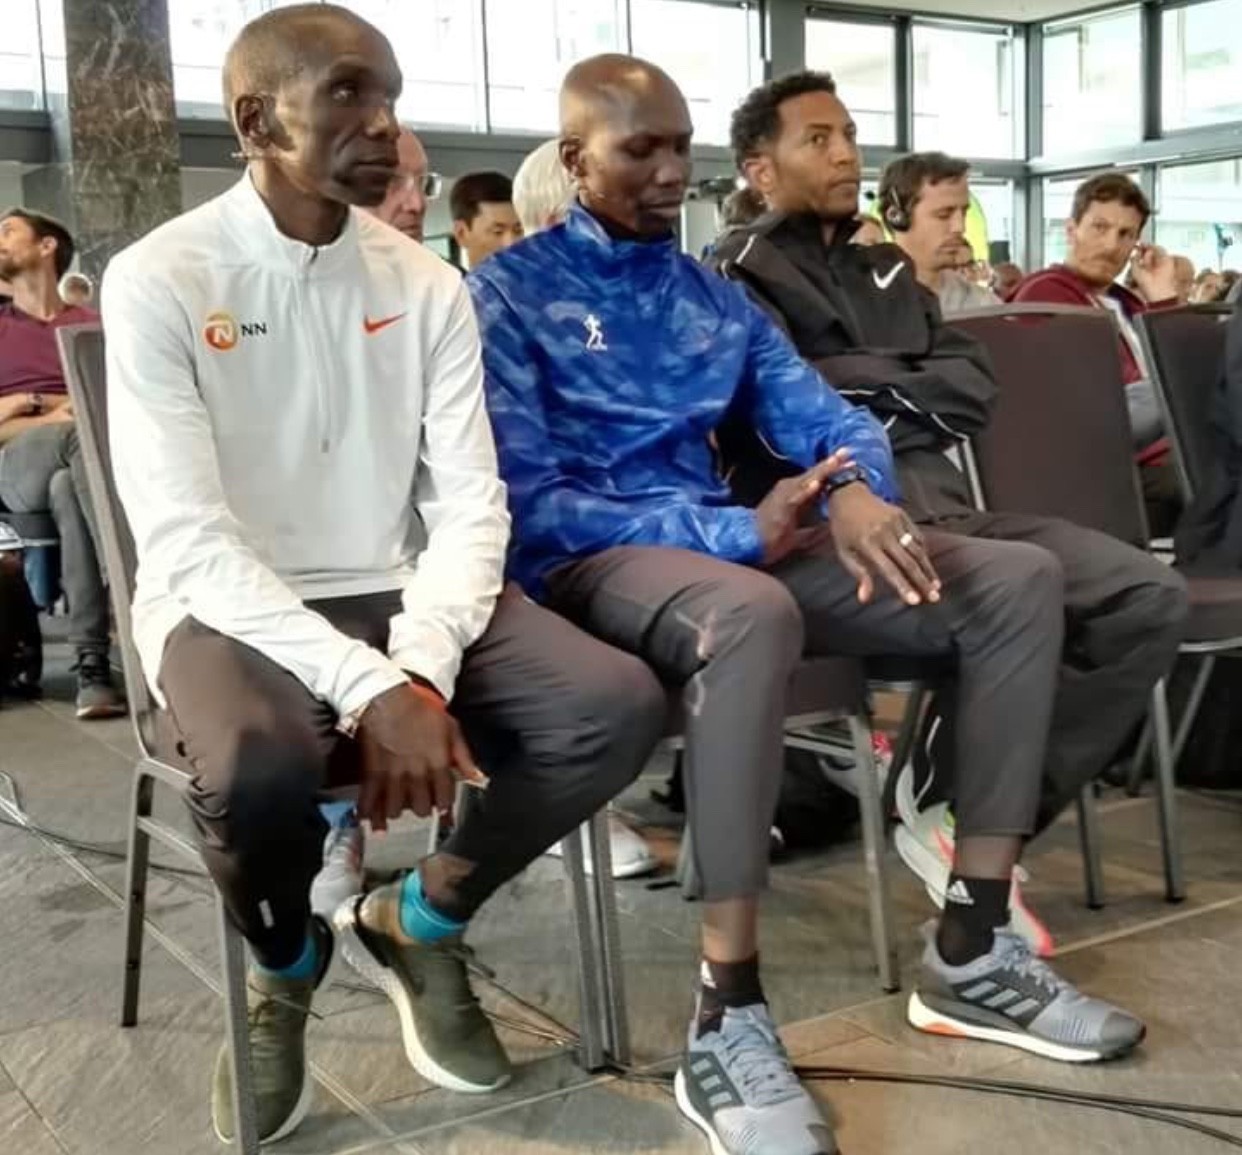 Eliud Kipchoge and Wilson Kipsang are set to battle and maybe set a world record in just a few hours in Berlin